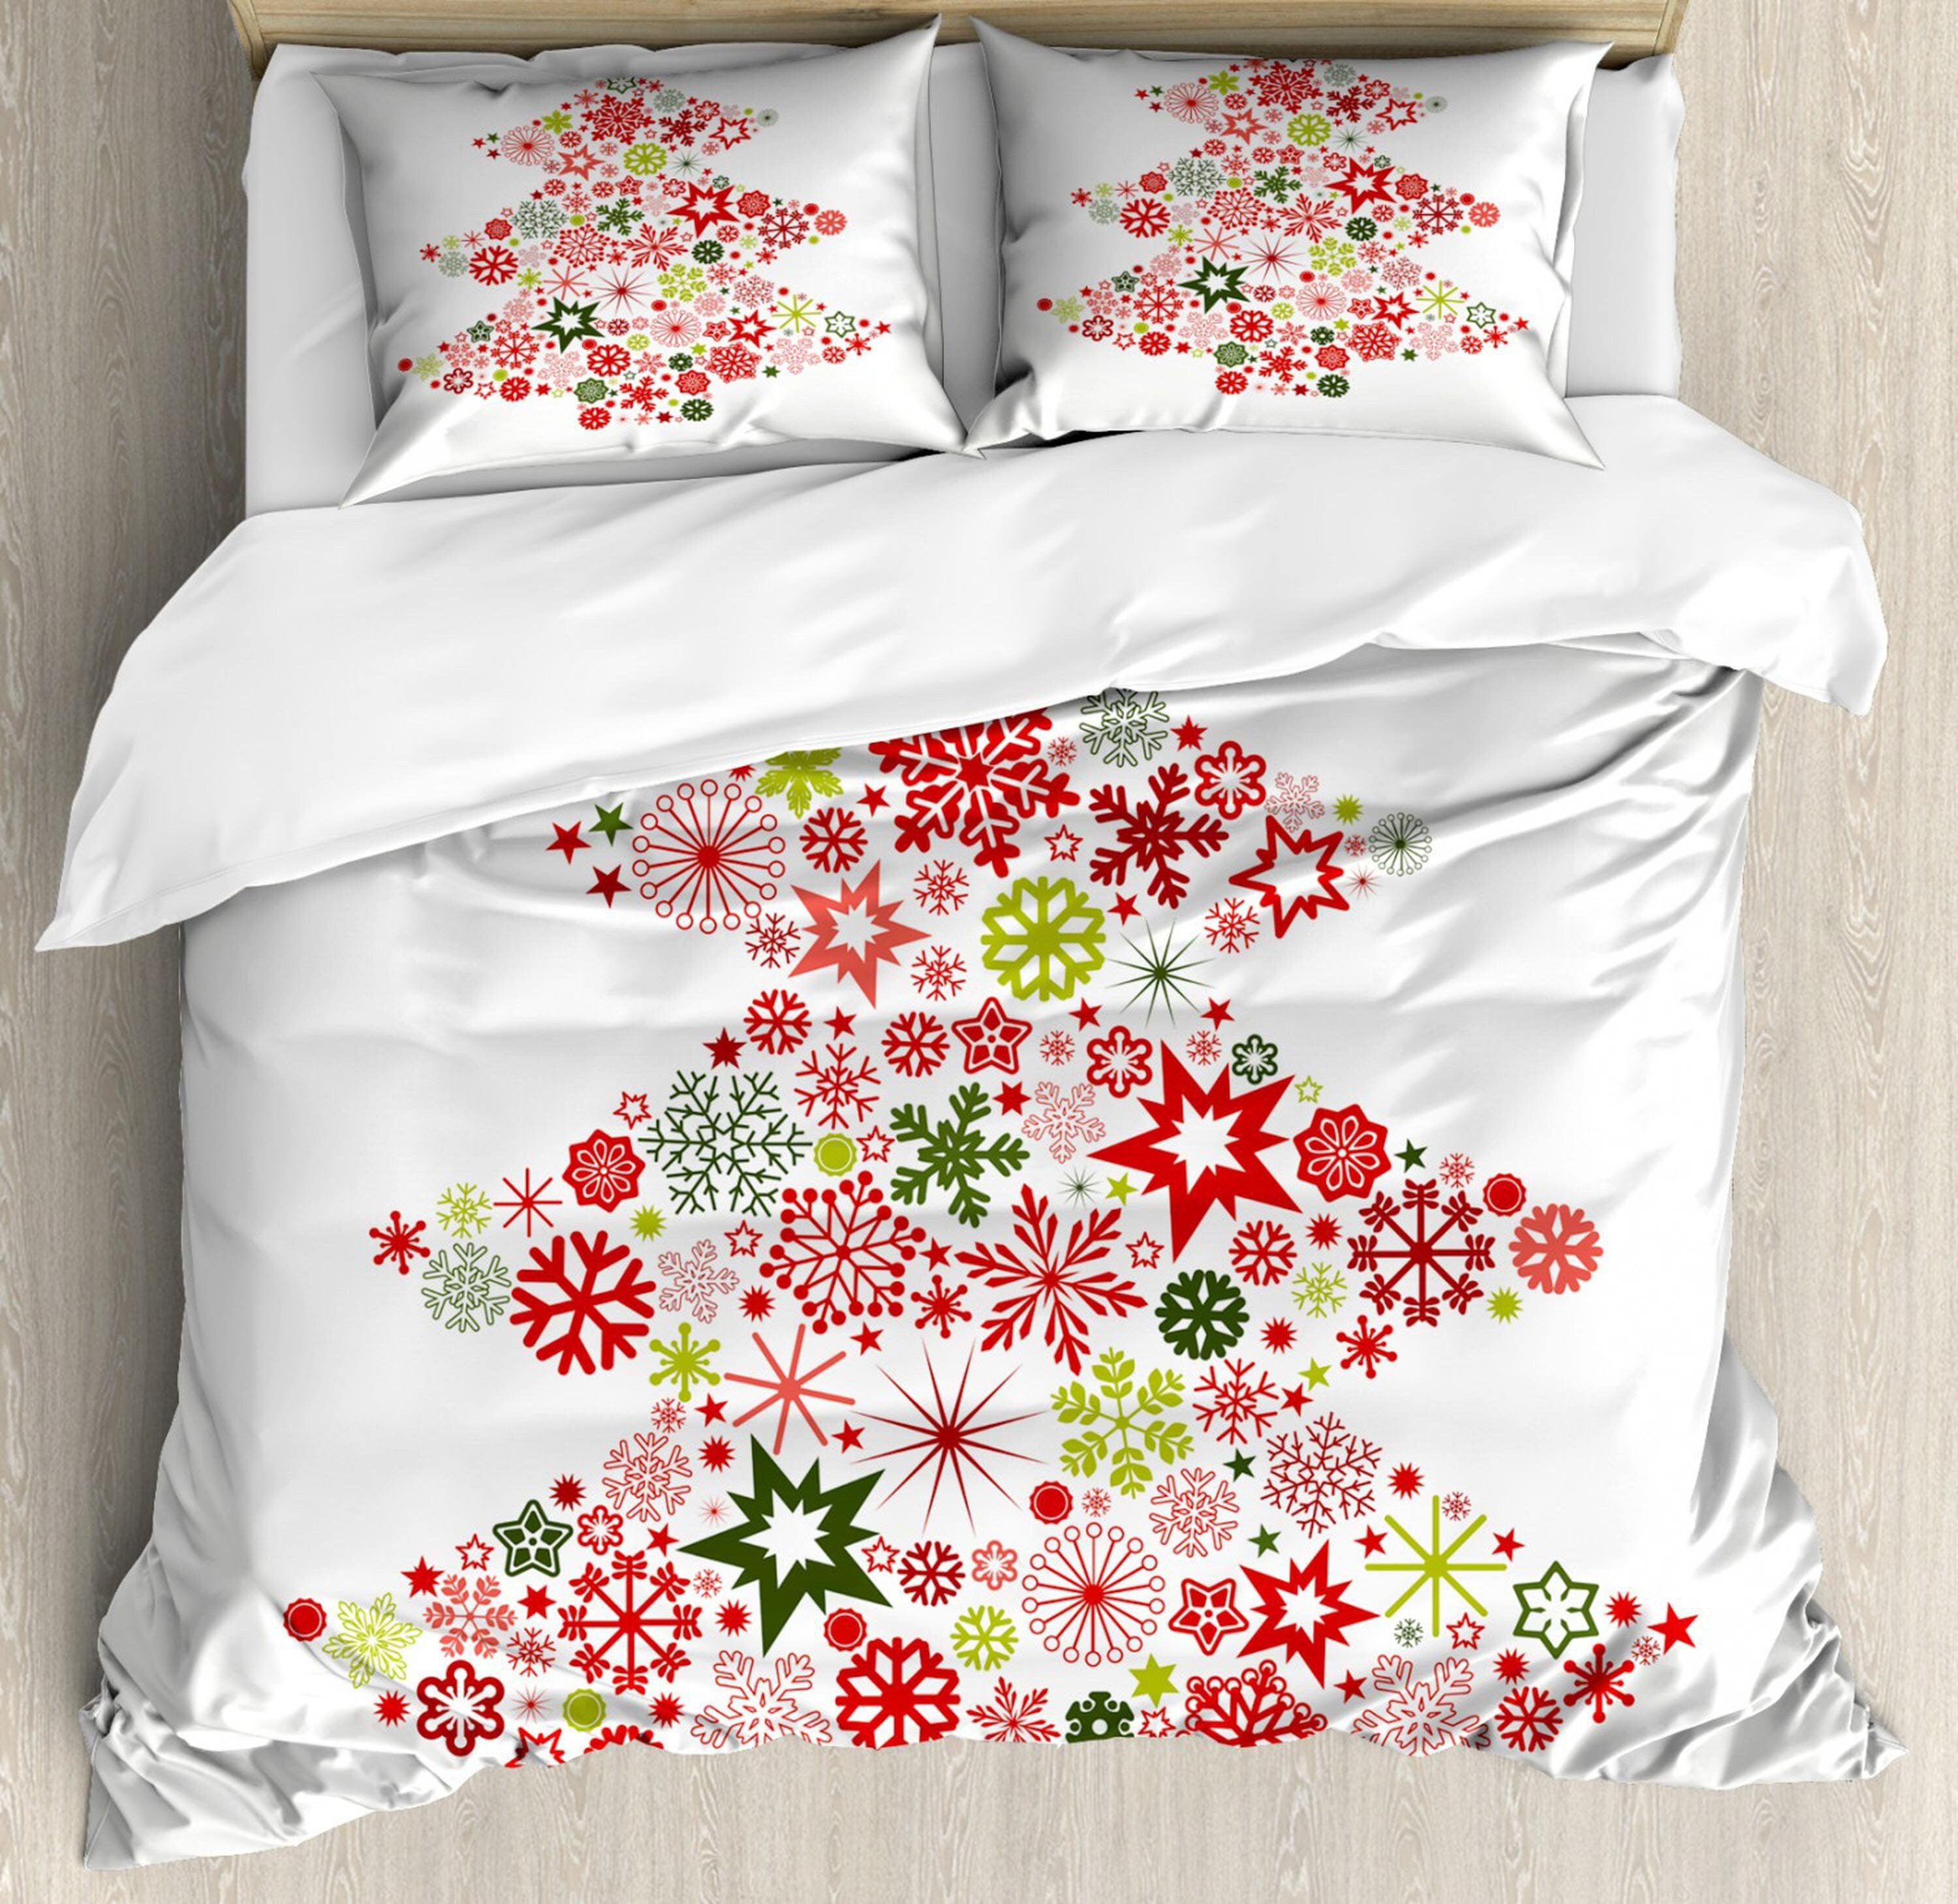 daintyduvet Whimsical snowflakes Christmas tree bedding & pillowcase holiday duvet cover king queen twin toddler bedding baby Christmas farmhouse decor